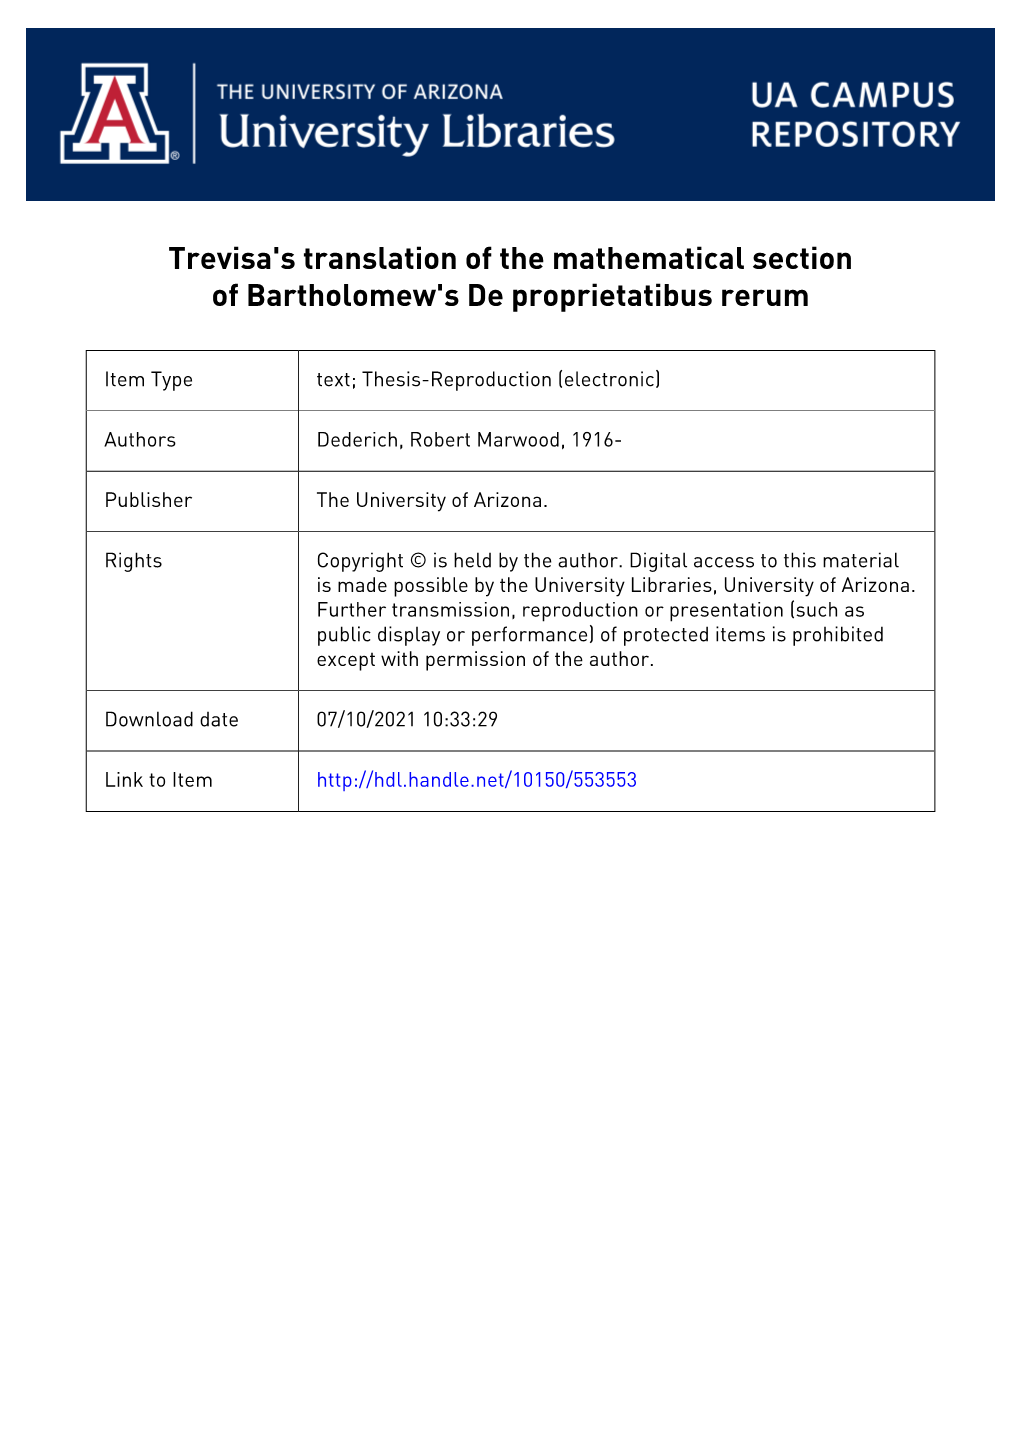 Trevisa's Translation Op the Mathematical Section Op